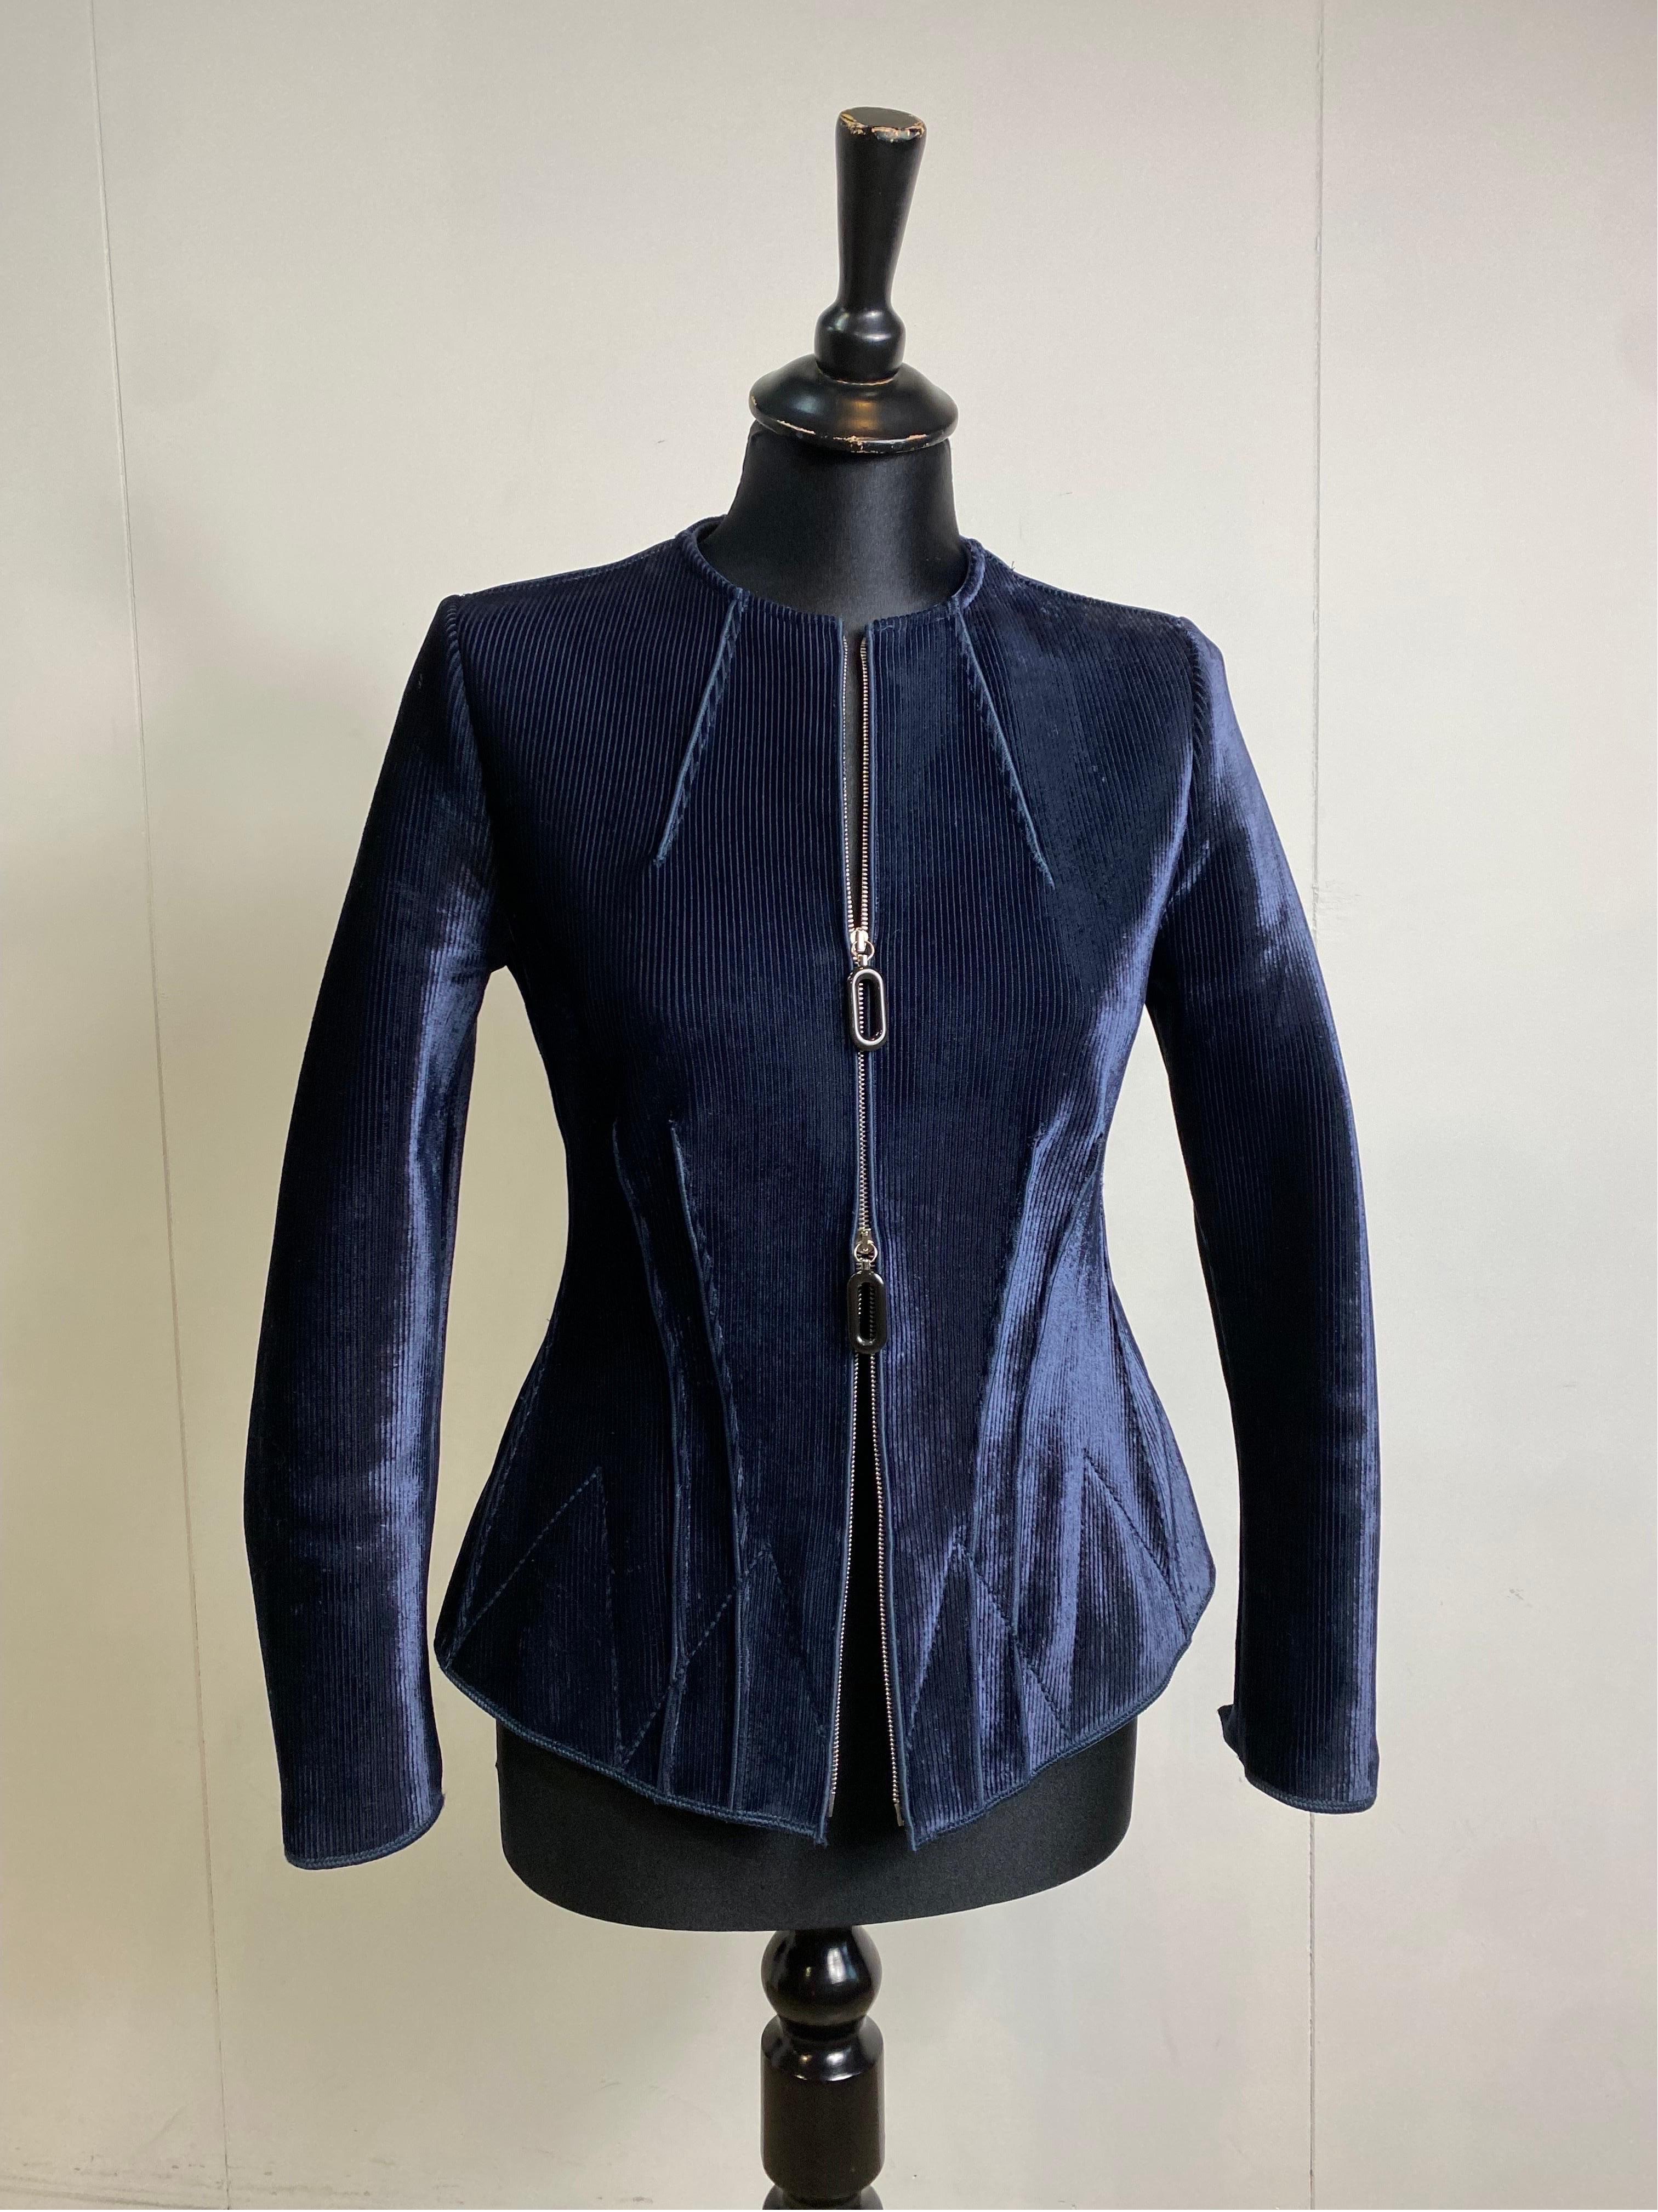 Giorgio Armani Blue Elegant Jacket In Excellent Condition For Sale In Carnate, IT